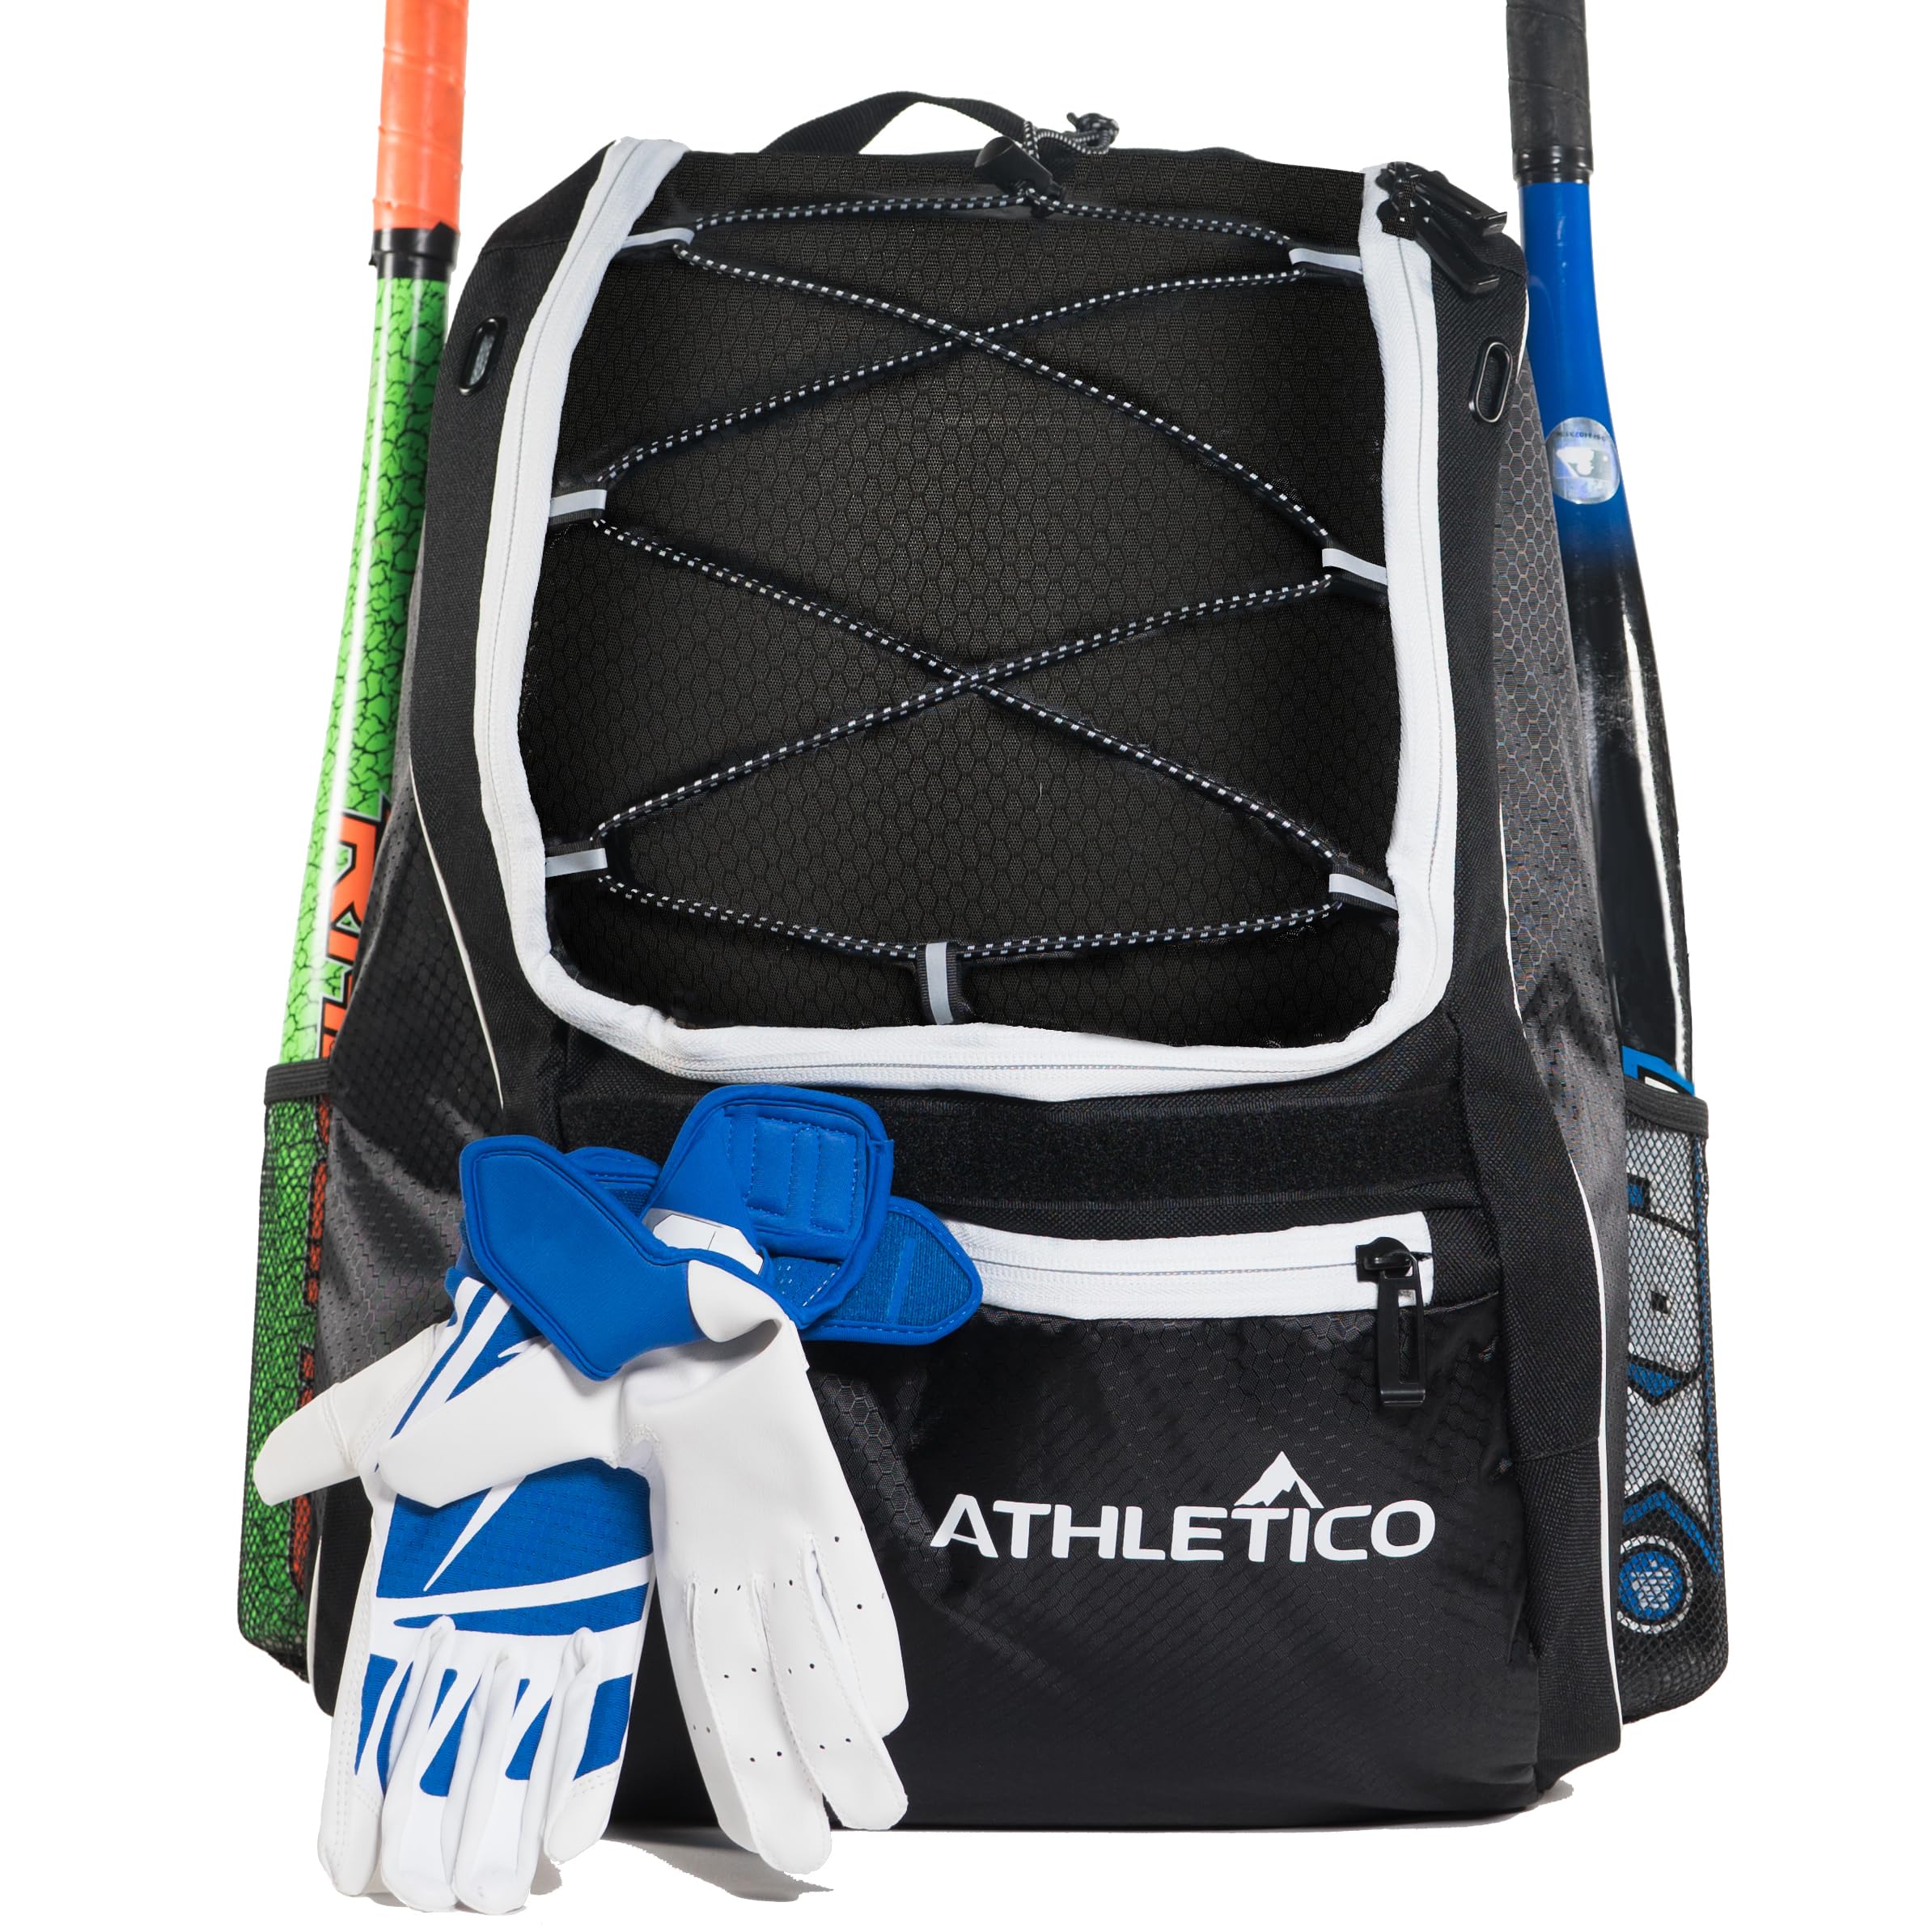 Athletico Baseball Bat Bag - Backpack for Baseball, T-Ball & Softball Equipment & Gear for Youth and Adults | Holds Bat, Helmet, Glove, & Shoes |Shoe Compartment & Fence Hook  - Very Good